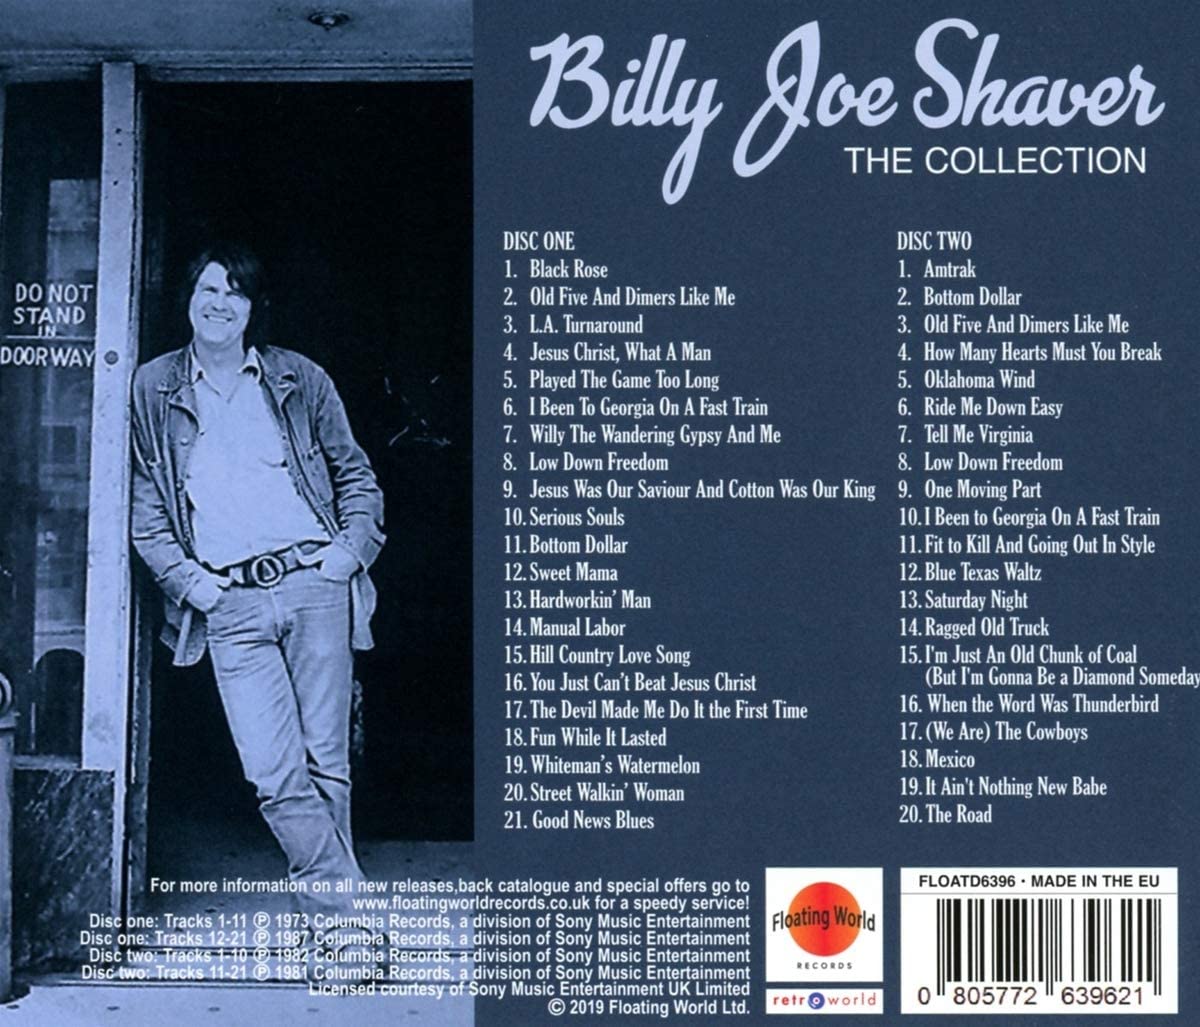 Billy Joe Shaver - The Collection - 2CD